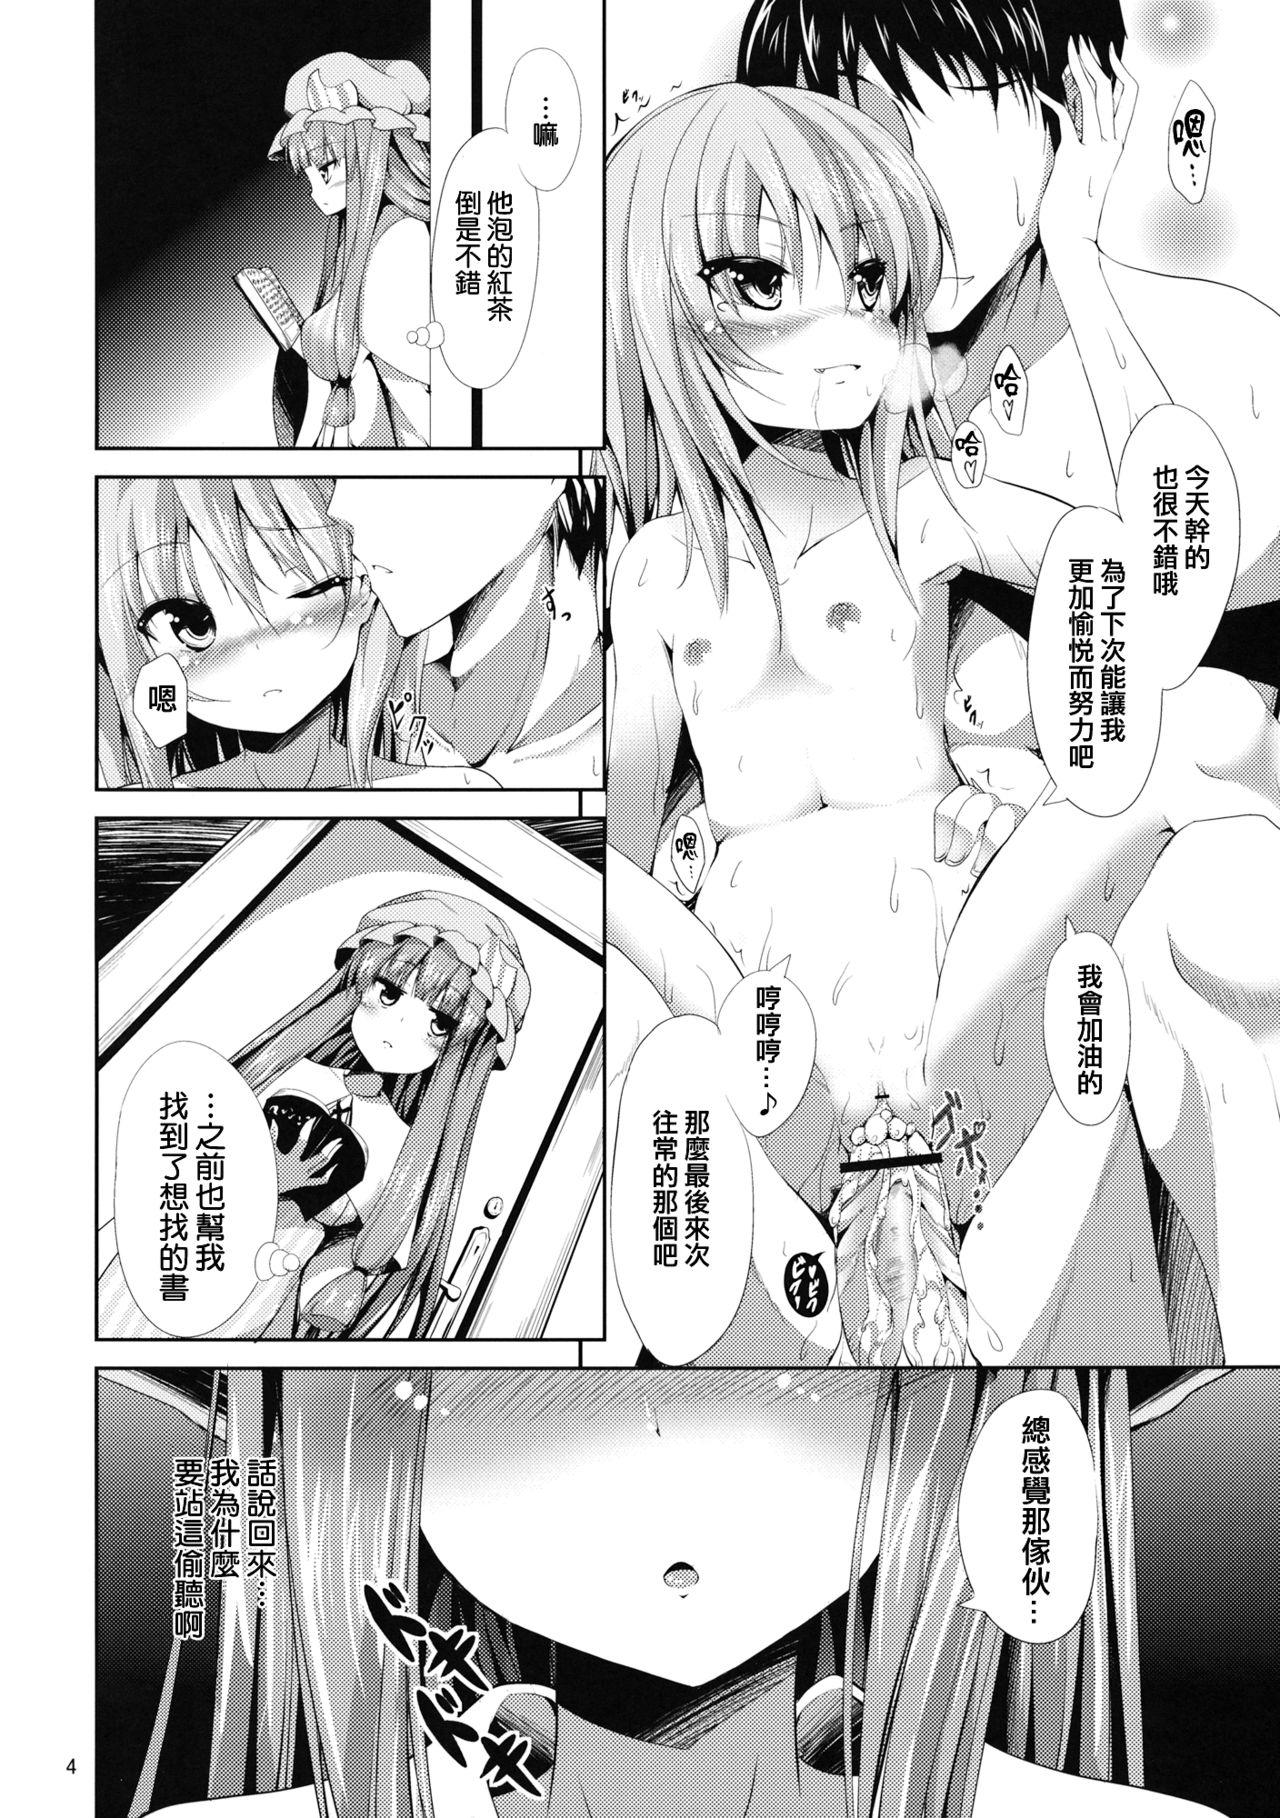 Lez Fuck Sweet nothingS - Touhou project Argenta - Page 4